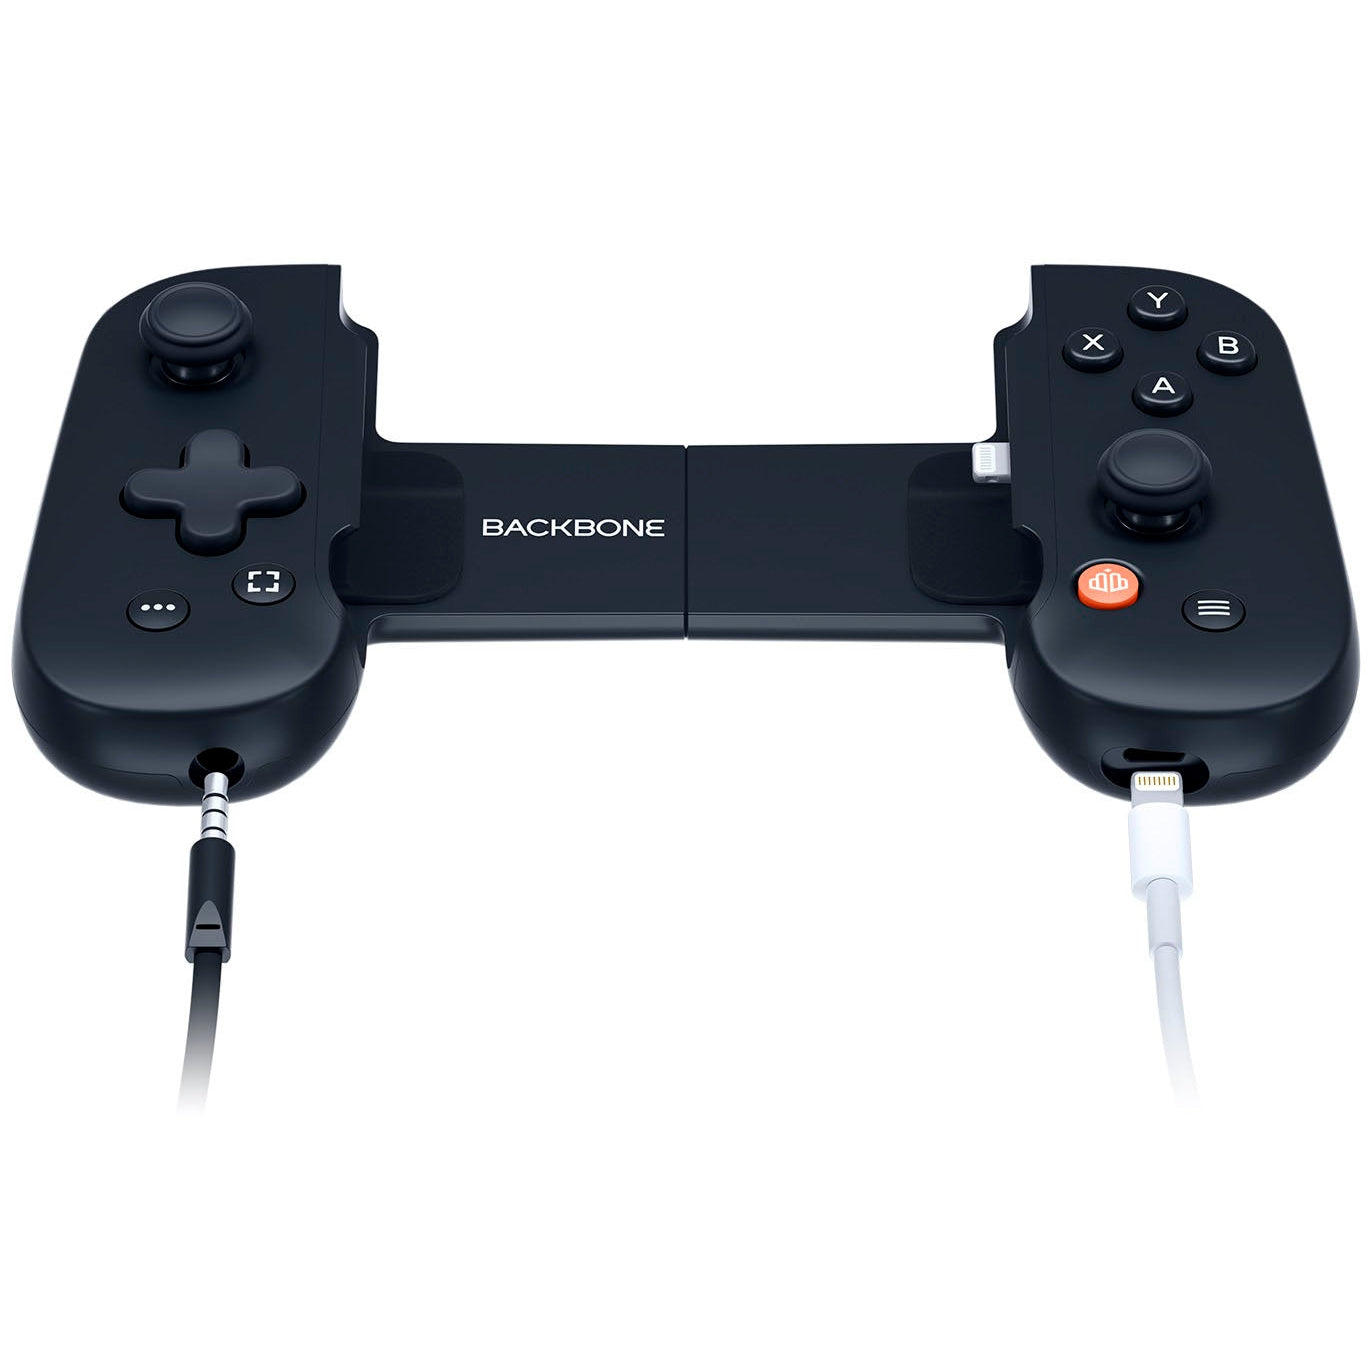 Backbone Mobile Gaming Controller for iPhone